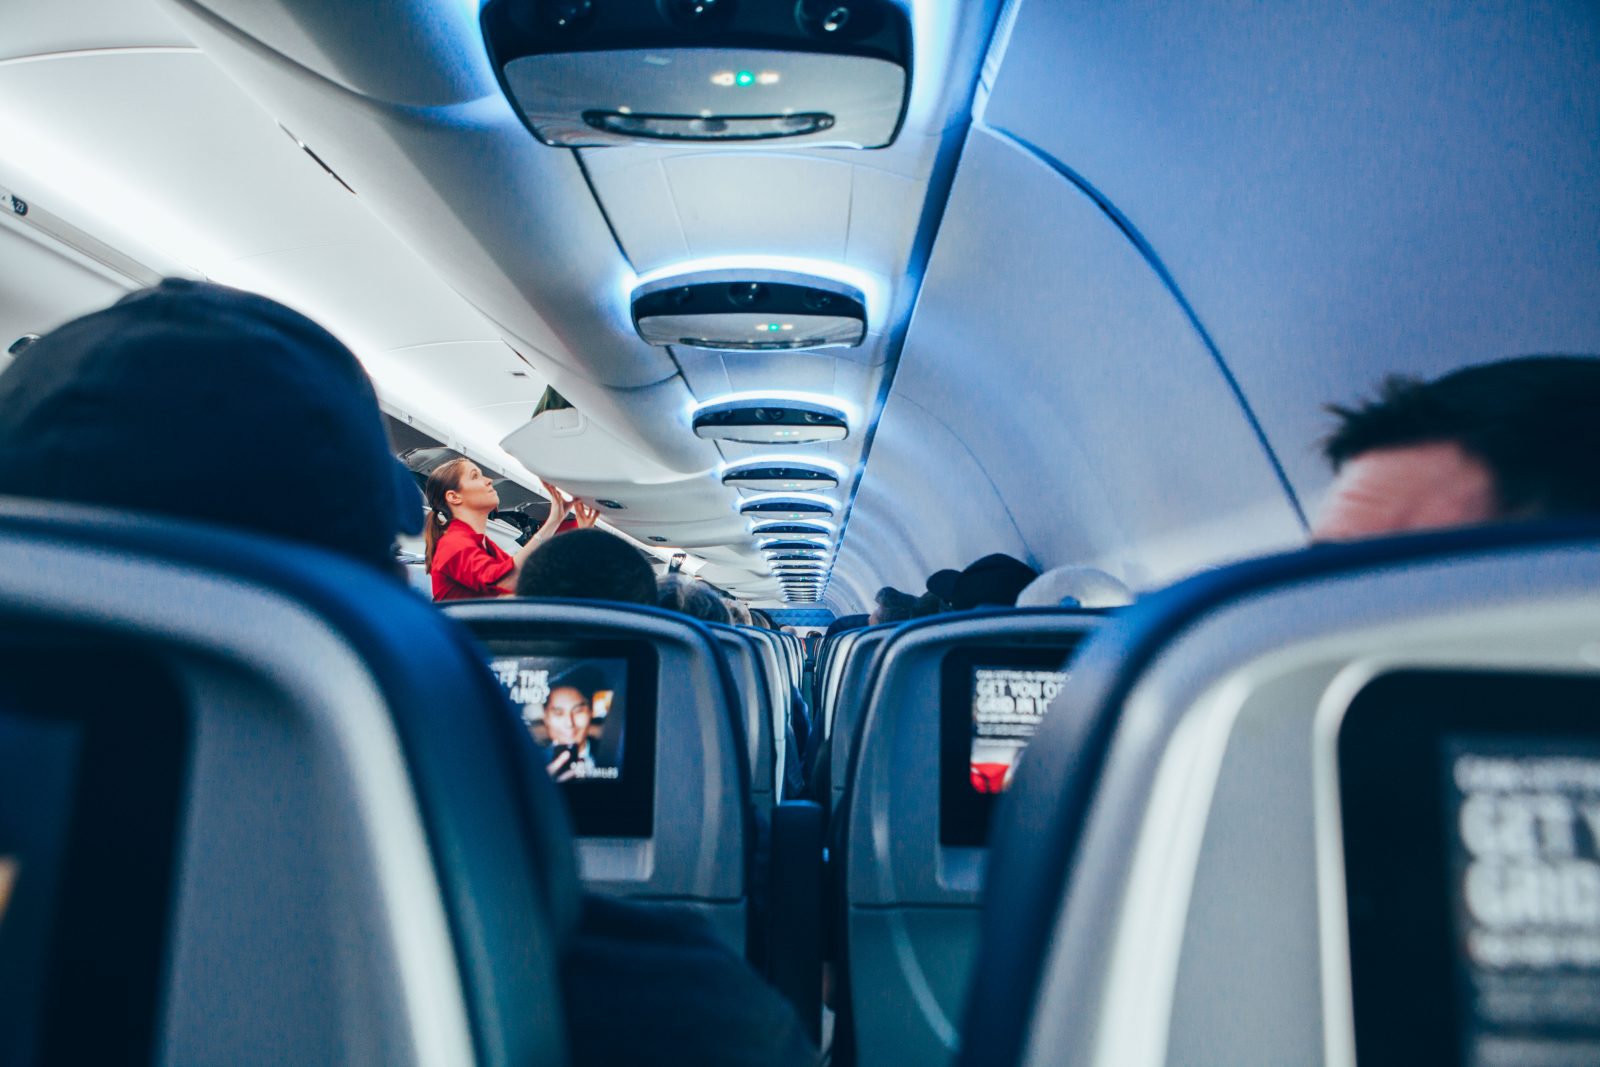 Airline Etiquette: Germ Spreading Passengers Are Now More Annoying than Drunks